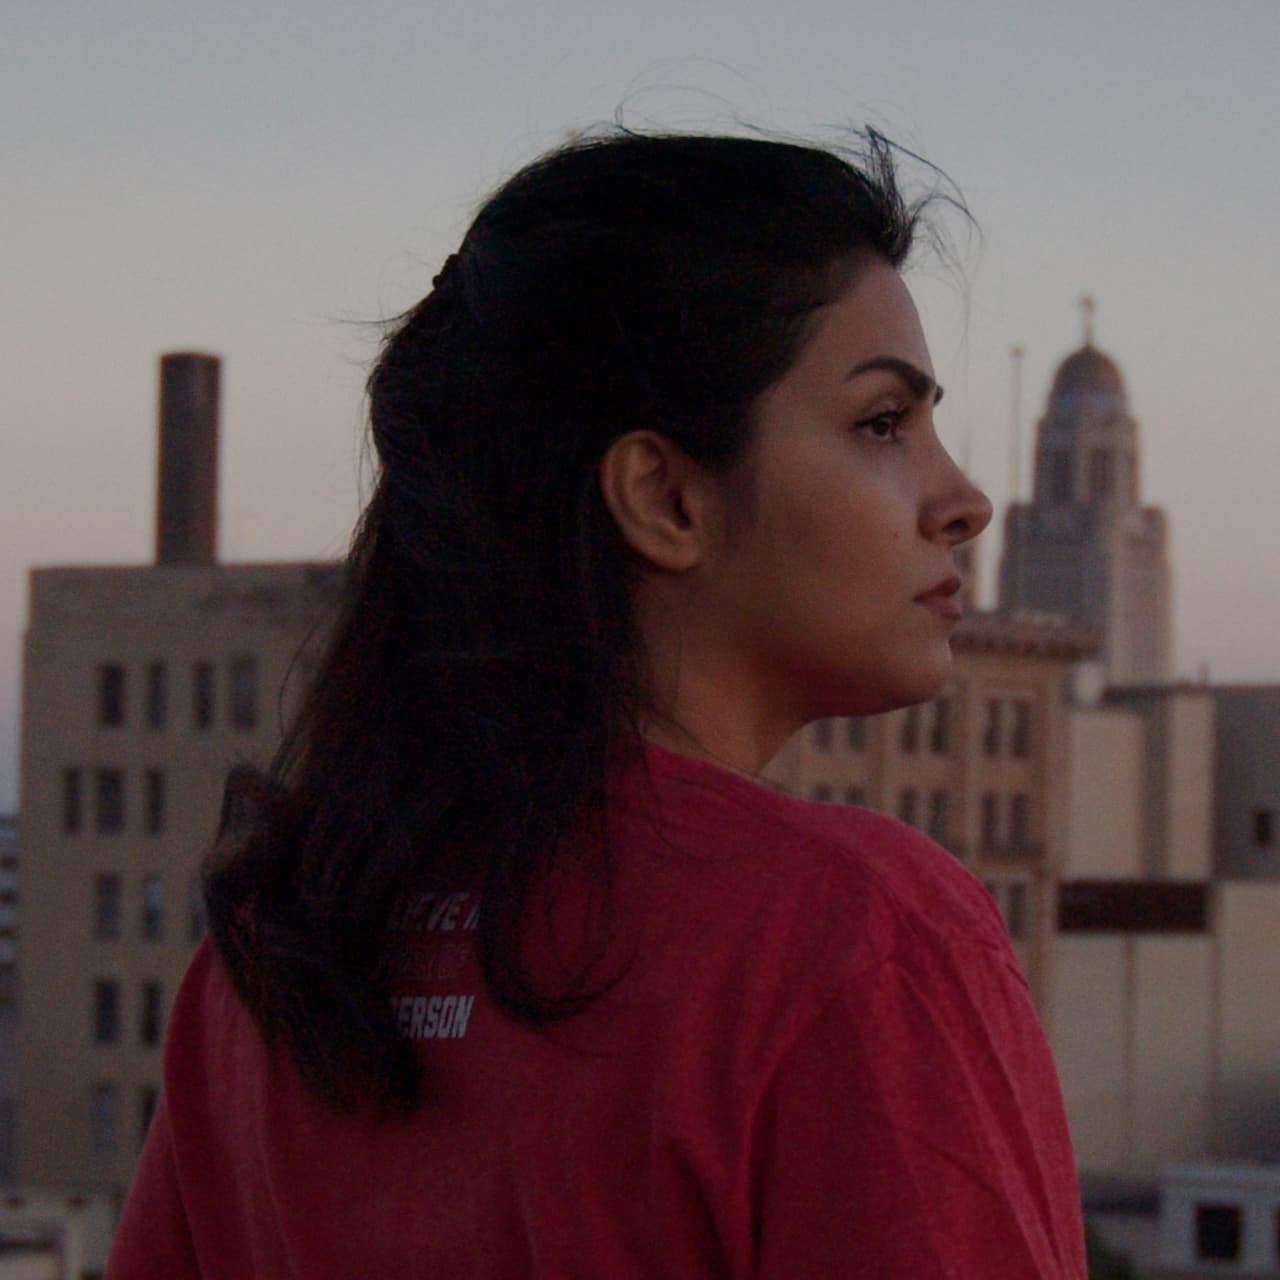 Profile of Nasrin from behind looking at the Lincoln skyline with the State Capitol in the distance